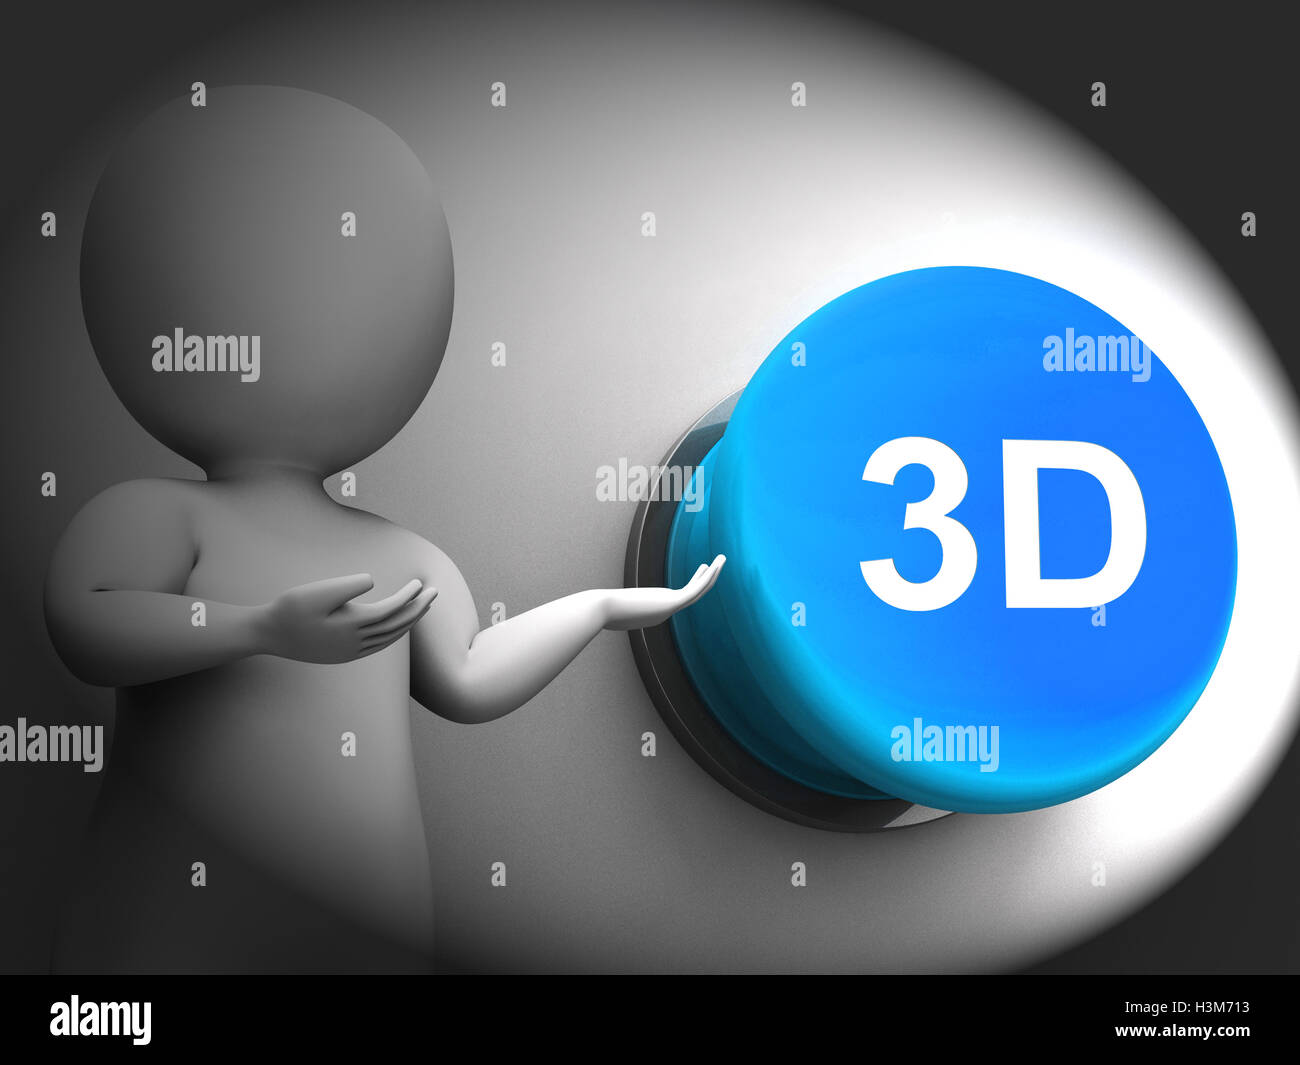 3d Pressed Means Three Dimensional Object Or Image Stock Photo